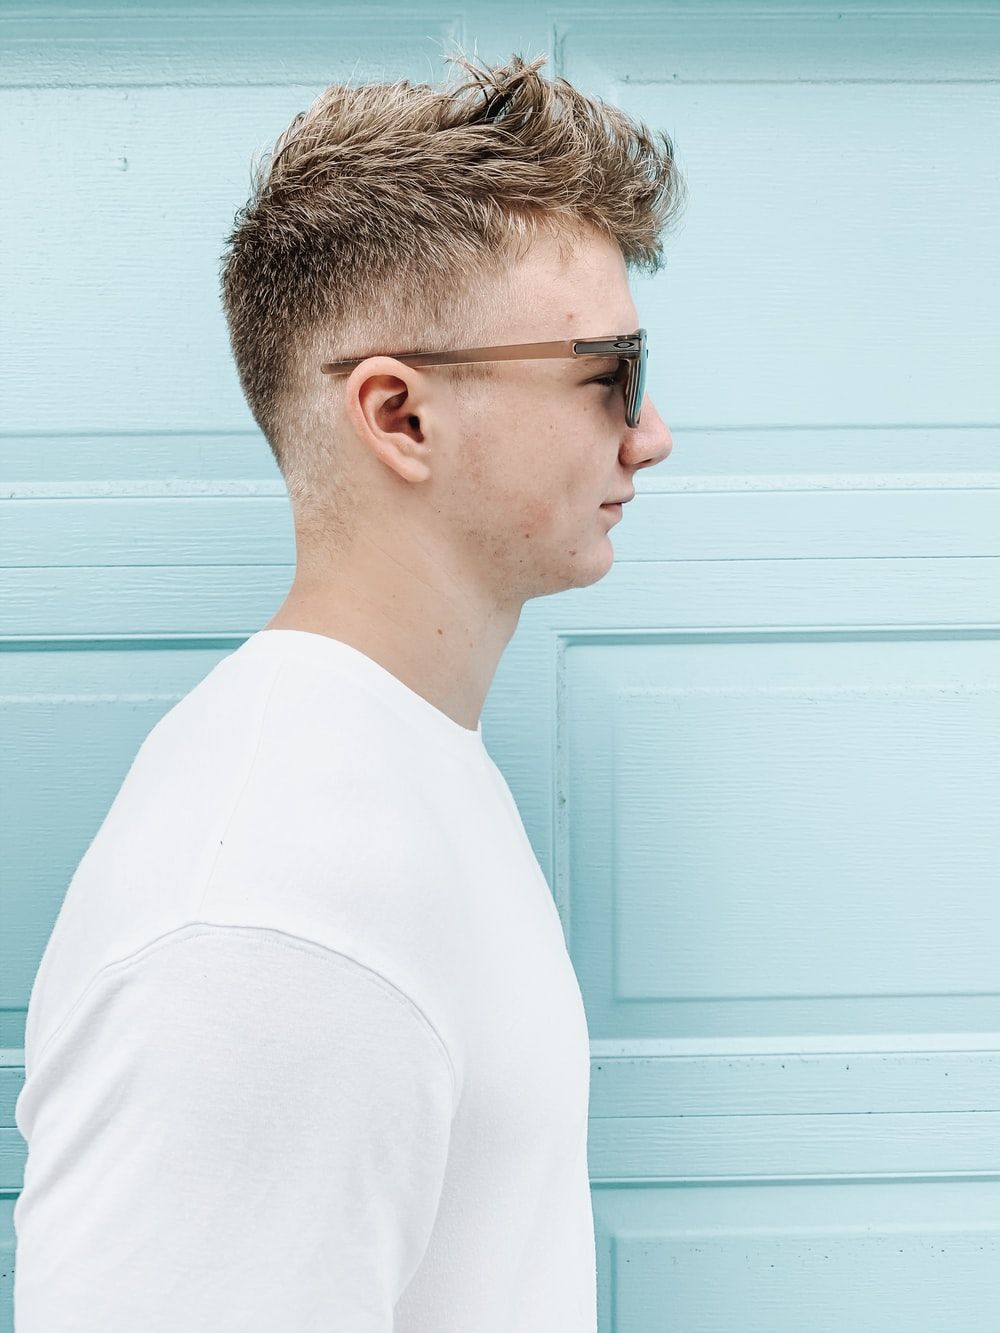 Brunette Teenager Boy with Spiky Brushed Up Hair · Free Stock Photo